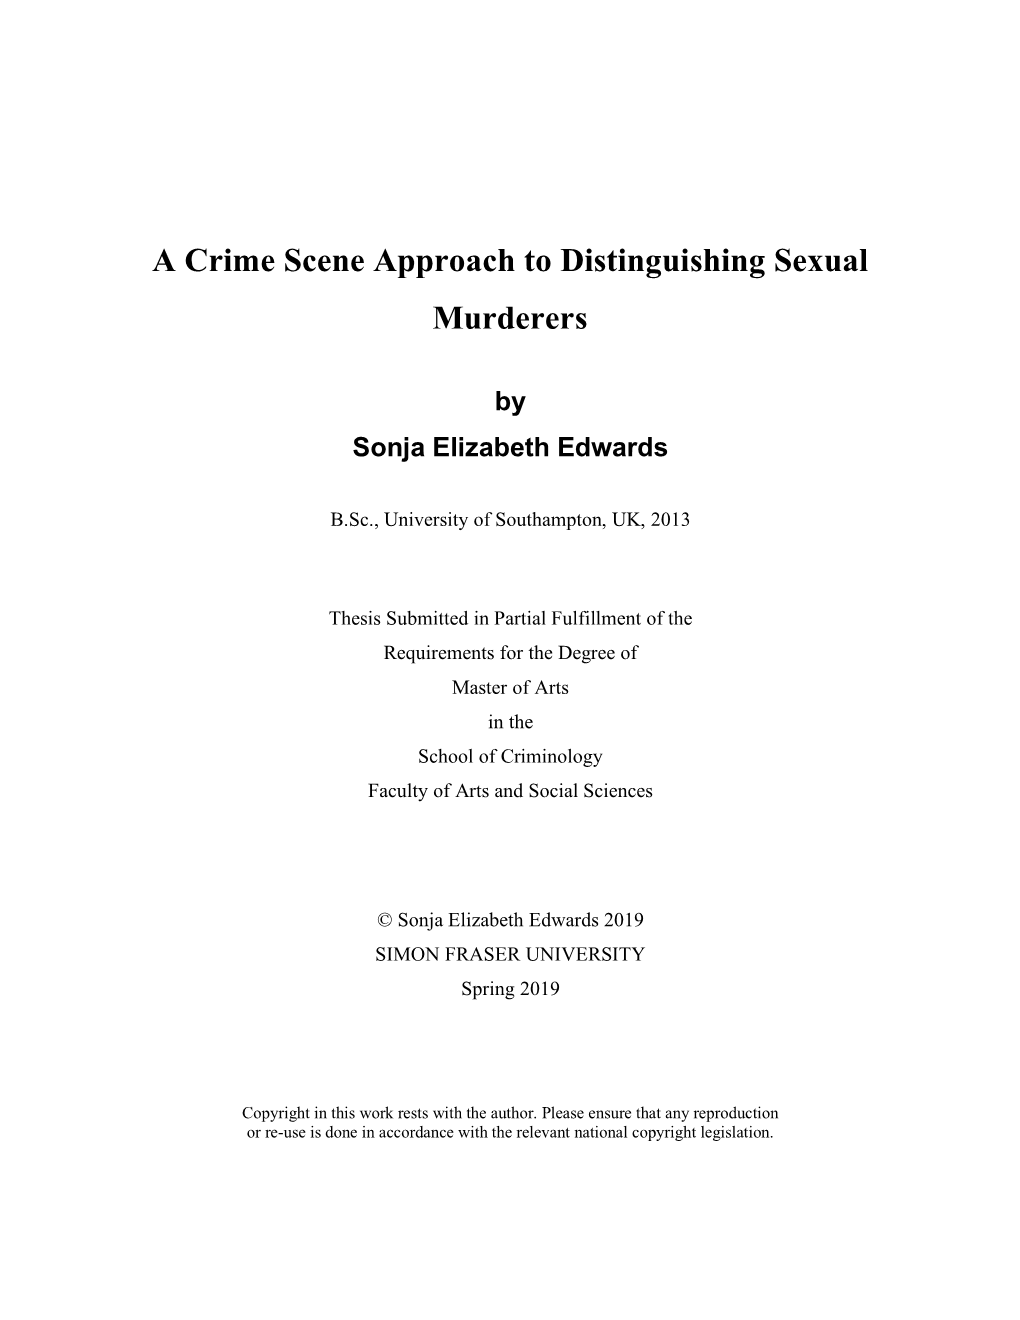 A Crime Scene Approach to Distinguishing Sexual Murderers